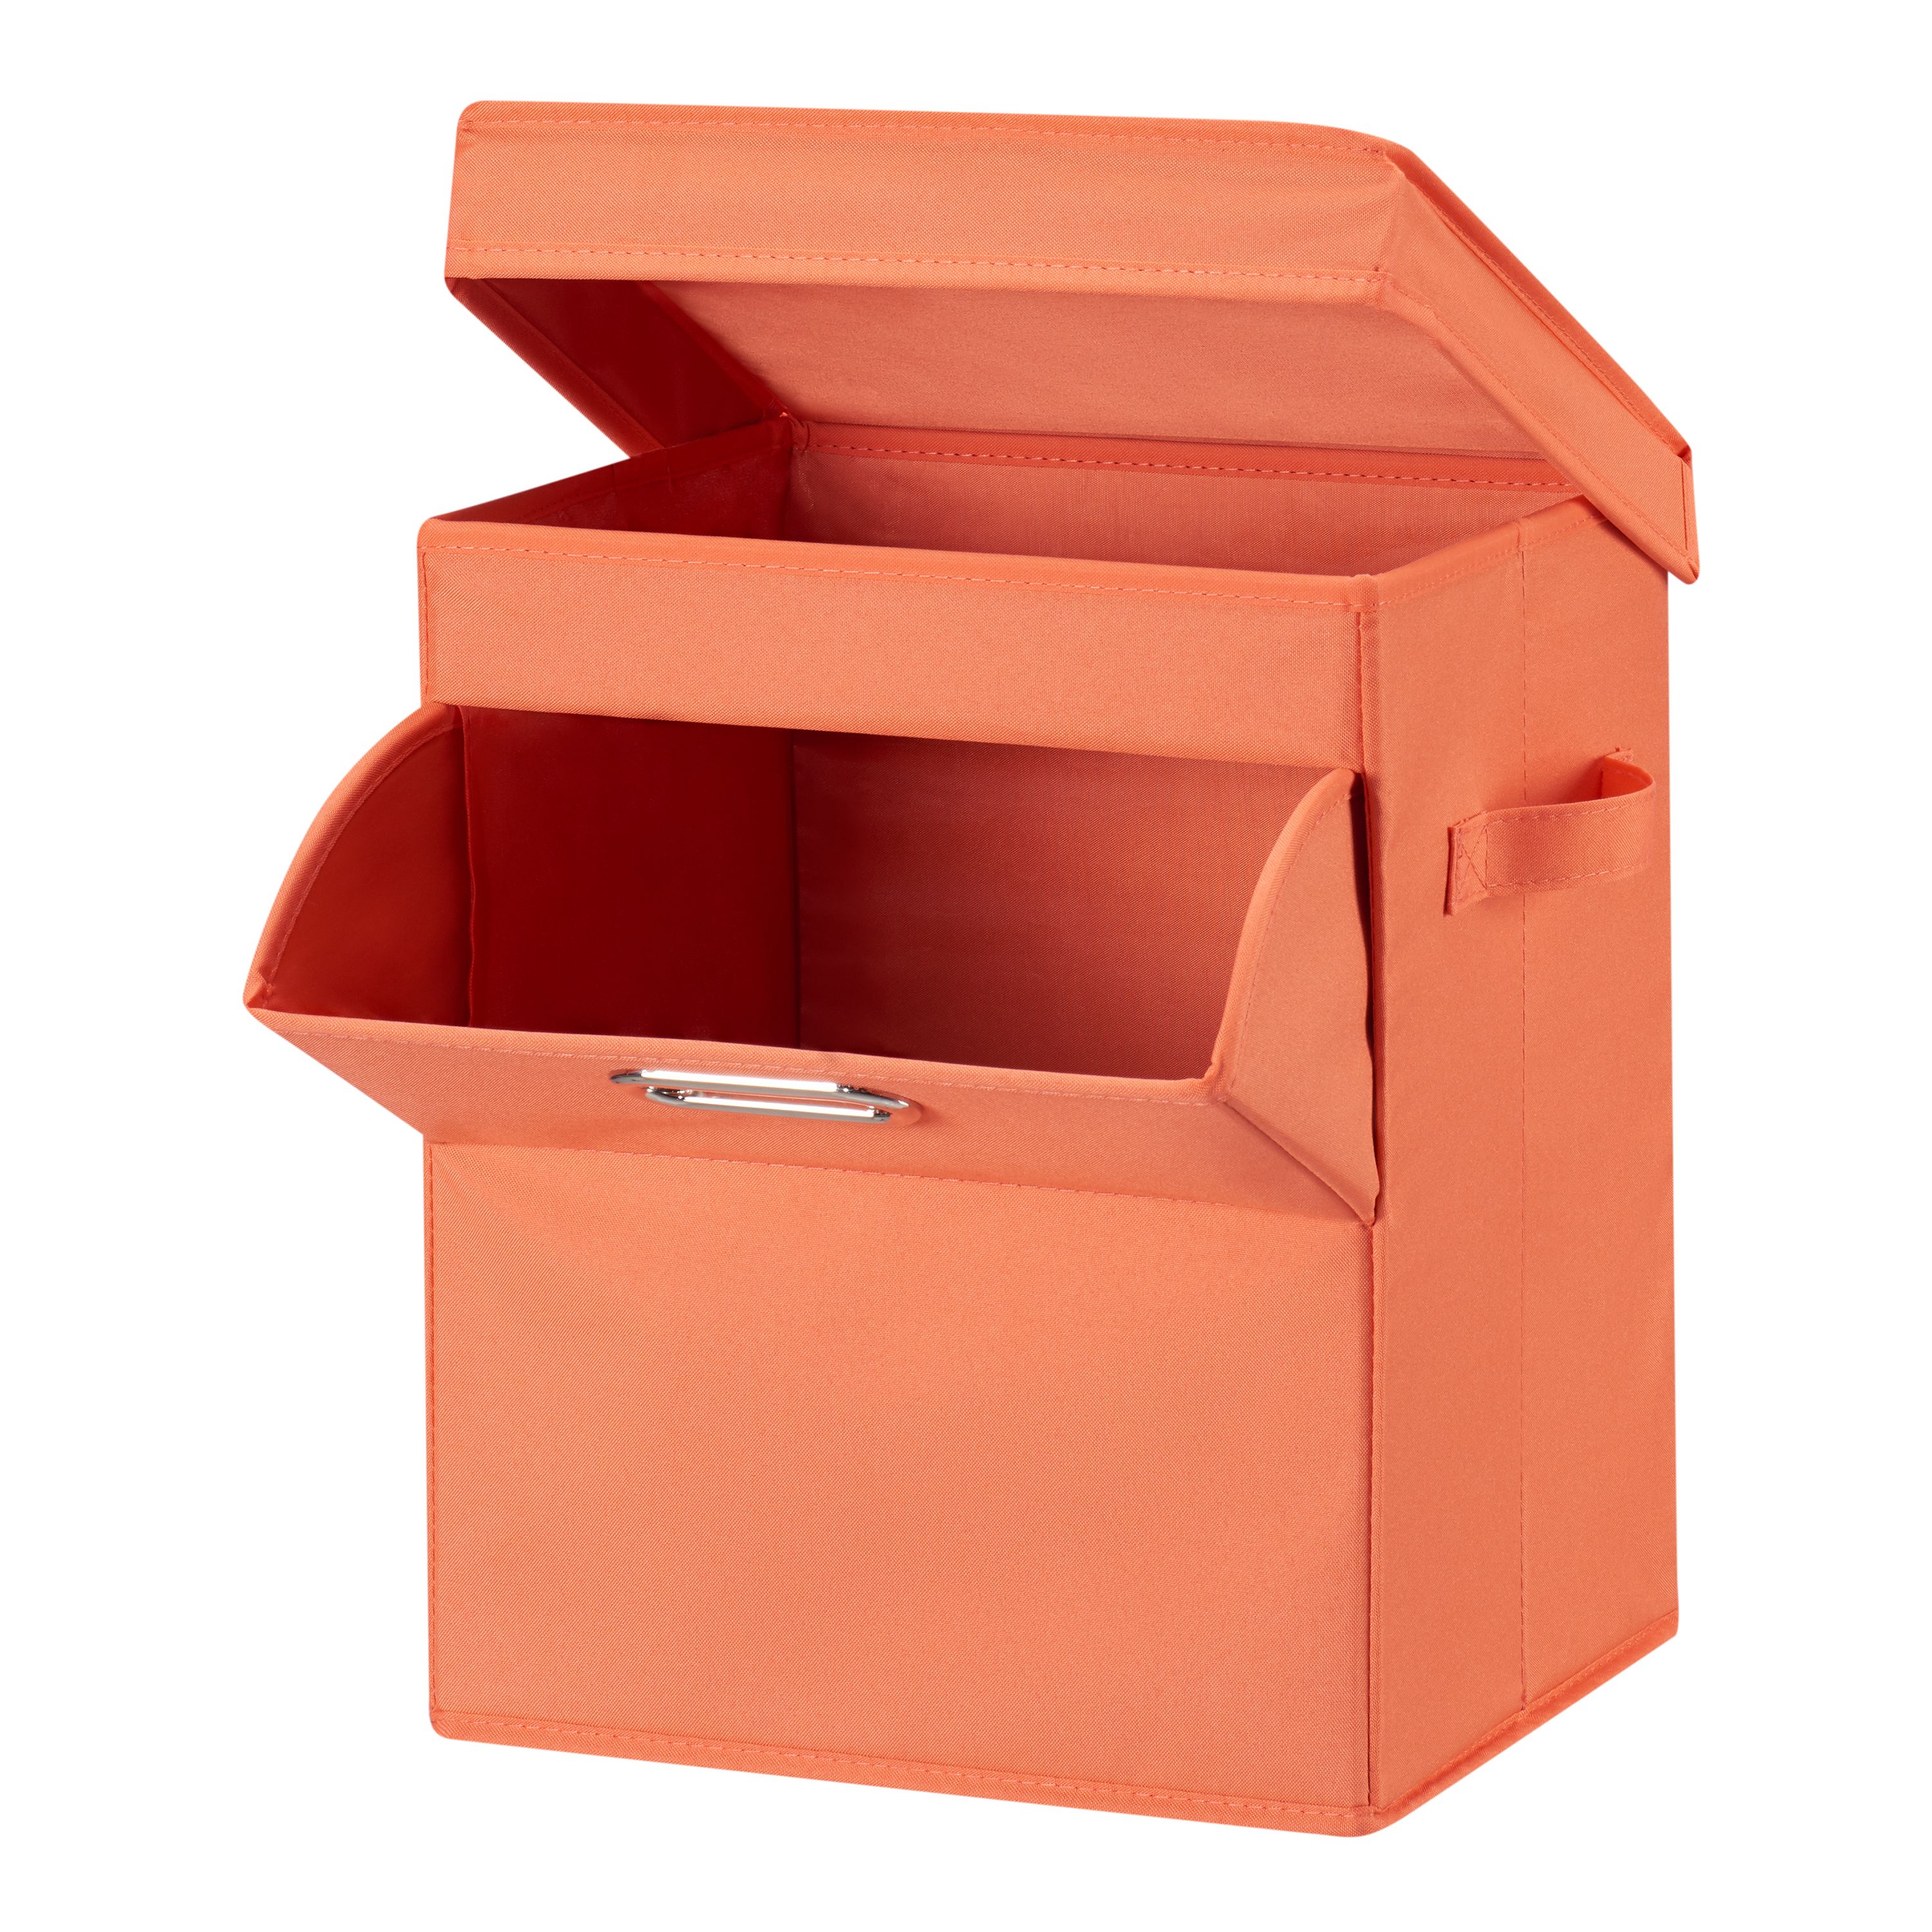 Mainstays Front Loading Stackable Laundry Hamper with Lid, Orange, 2 Pack - image 2 of 4